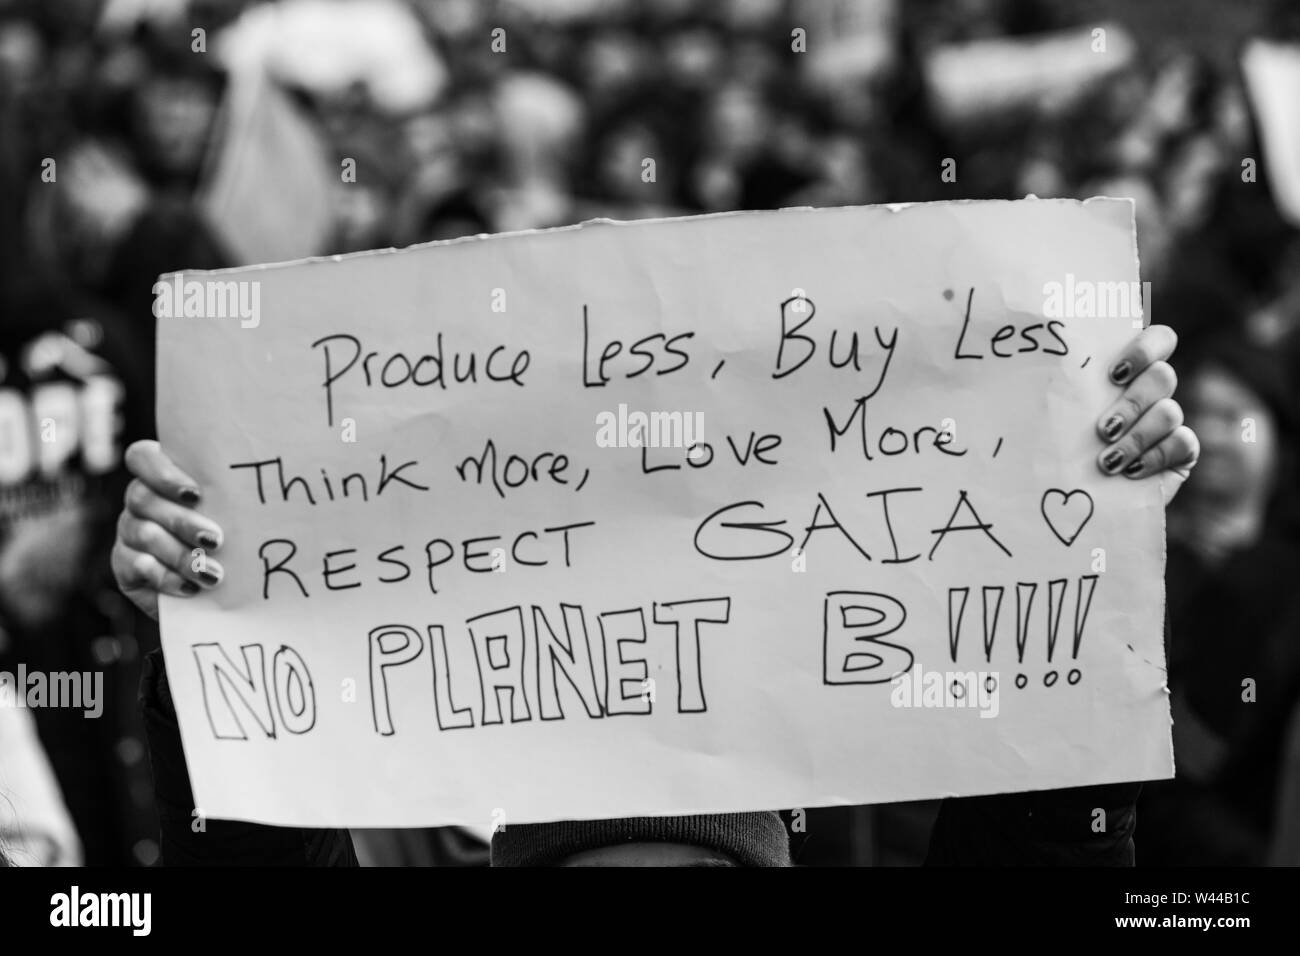 A closeup and monochrome view of a poster saying produce less, buy less, think more, love more, respect Gaia, no planet b, held by an ecological activist Stock Photo